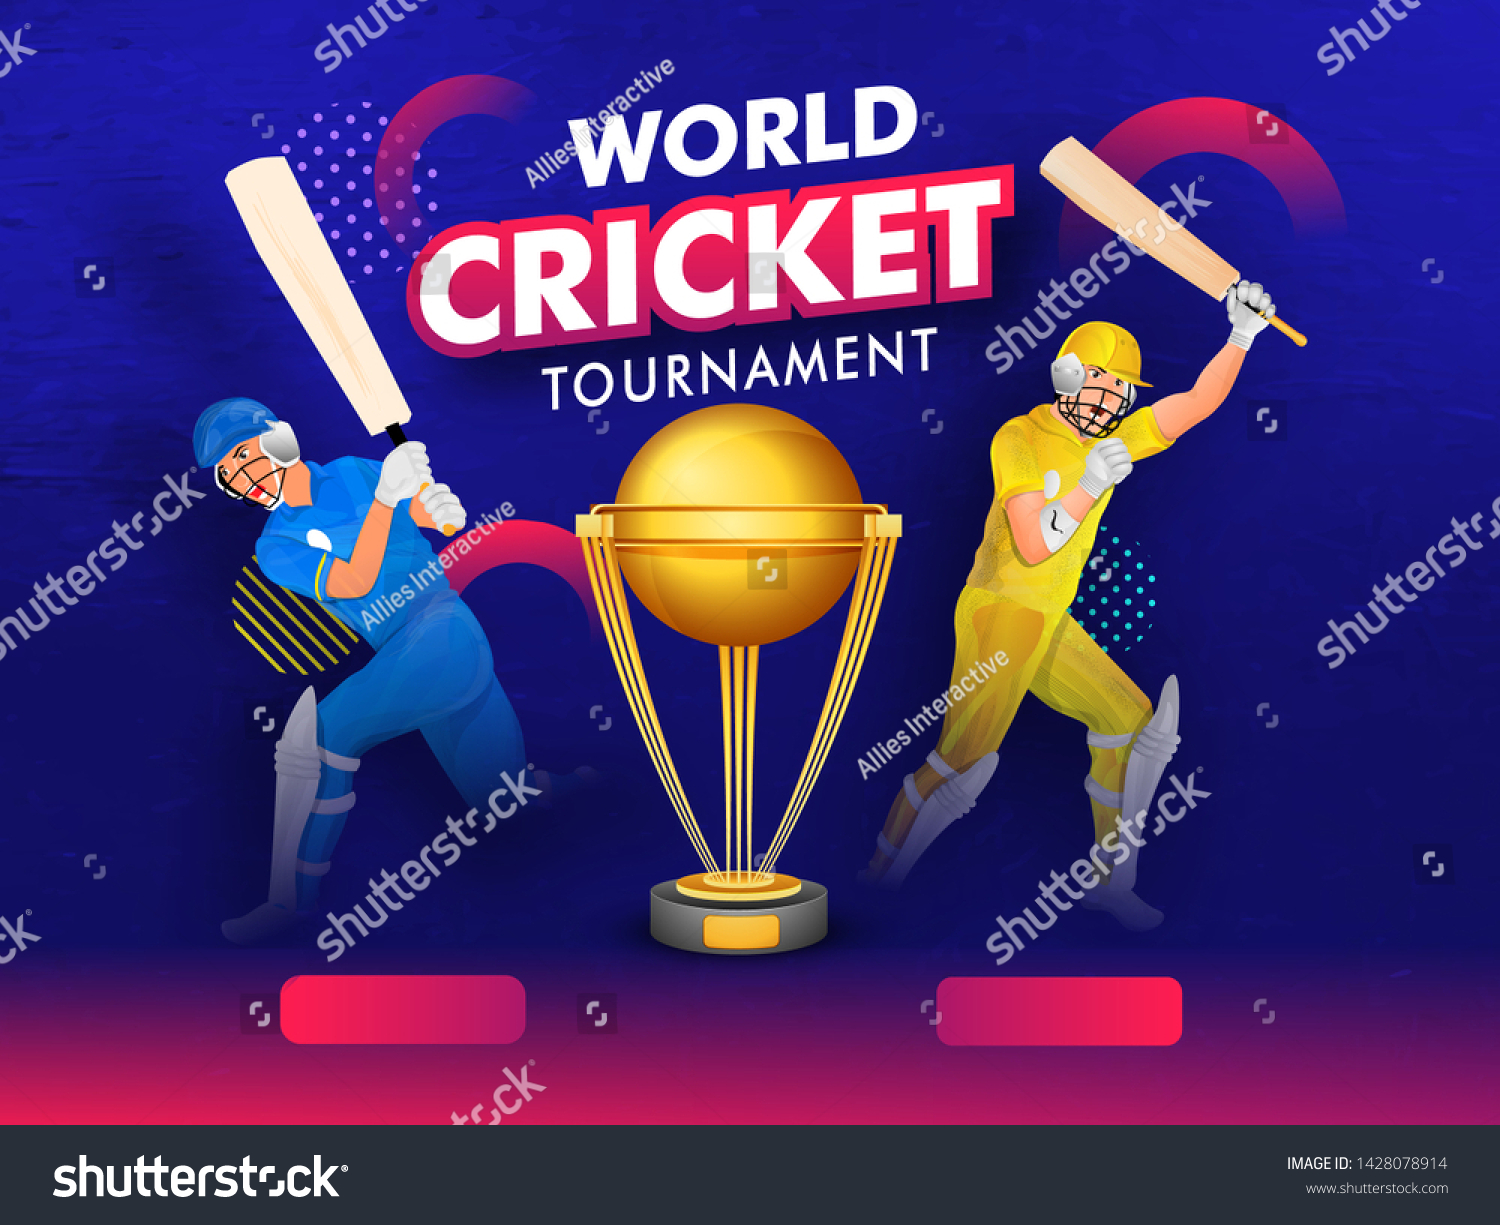 SVG of World Cricket Tournament banner or poster design with champion trophy and batsmen character of participant teams. svg